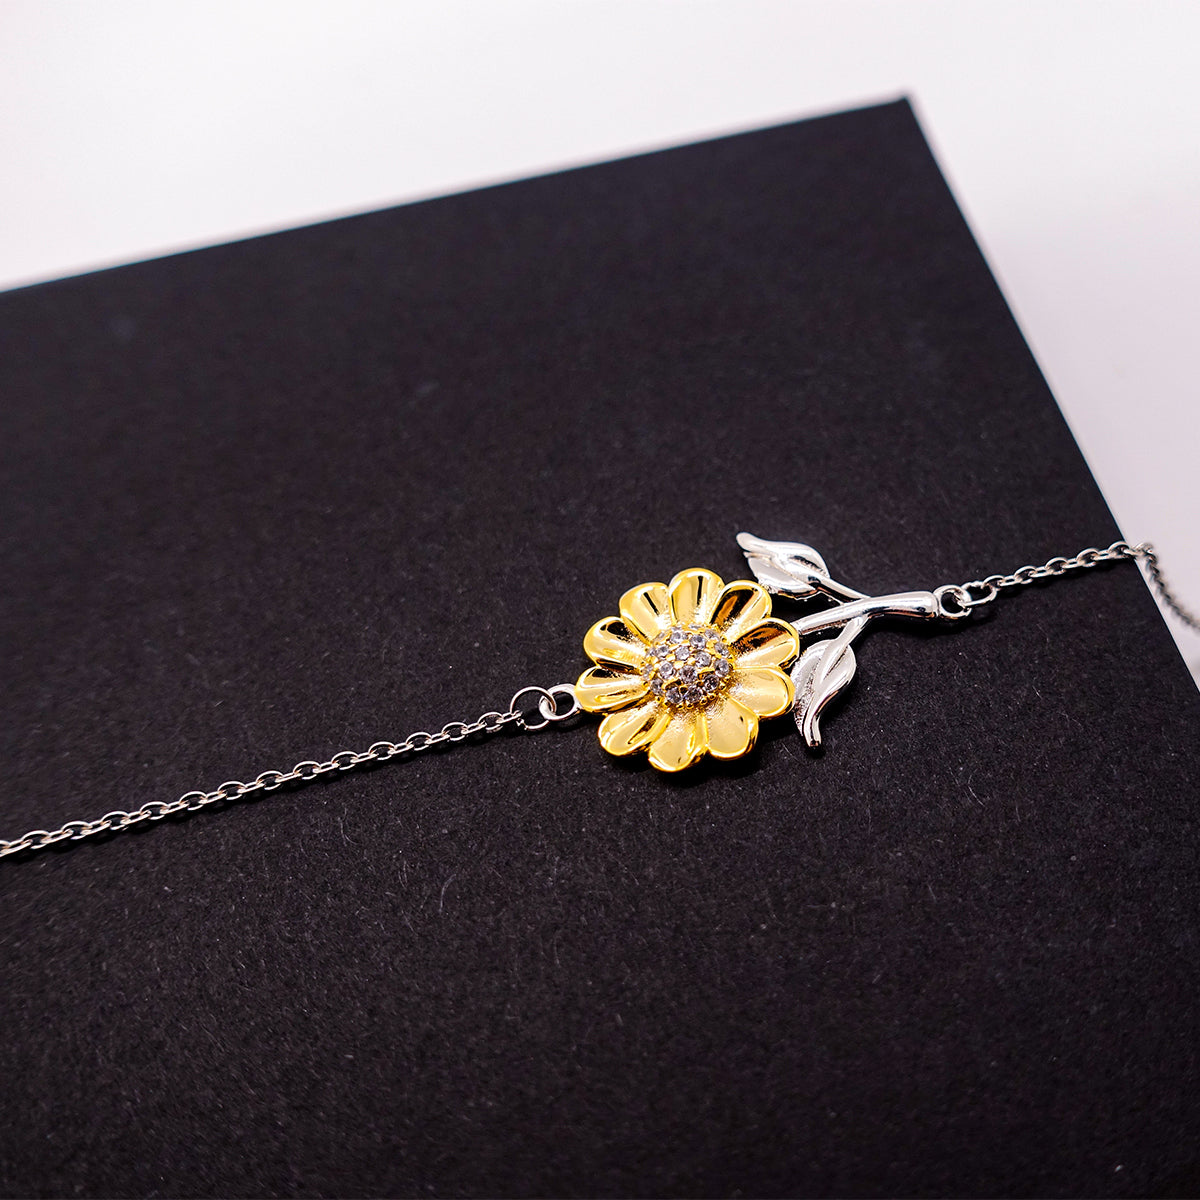 Heartwarming Sunflower Bracelet Retirement Coworkers Gifts for Naval Architect, Naval Architect May You be proud of the work you do, the person you are Gifts for Boss Men Women Friends